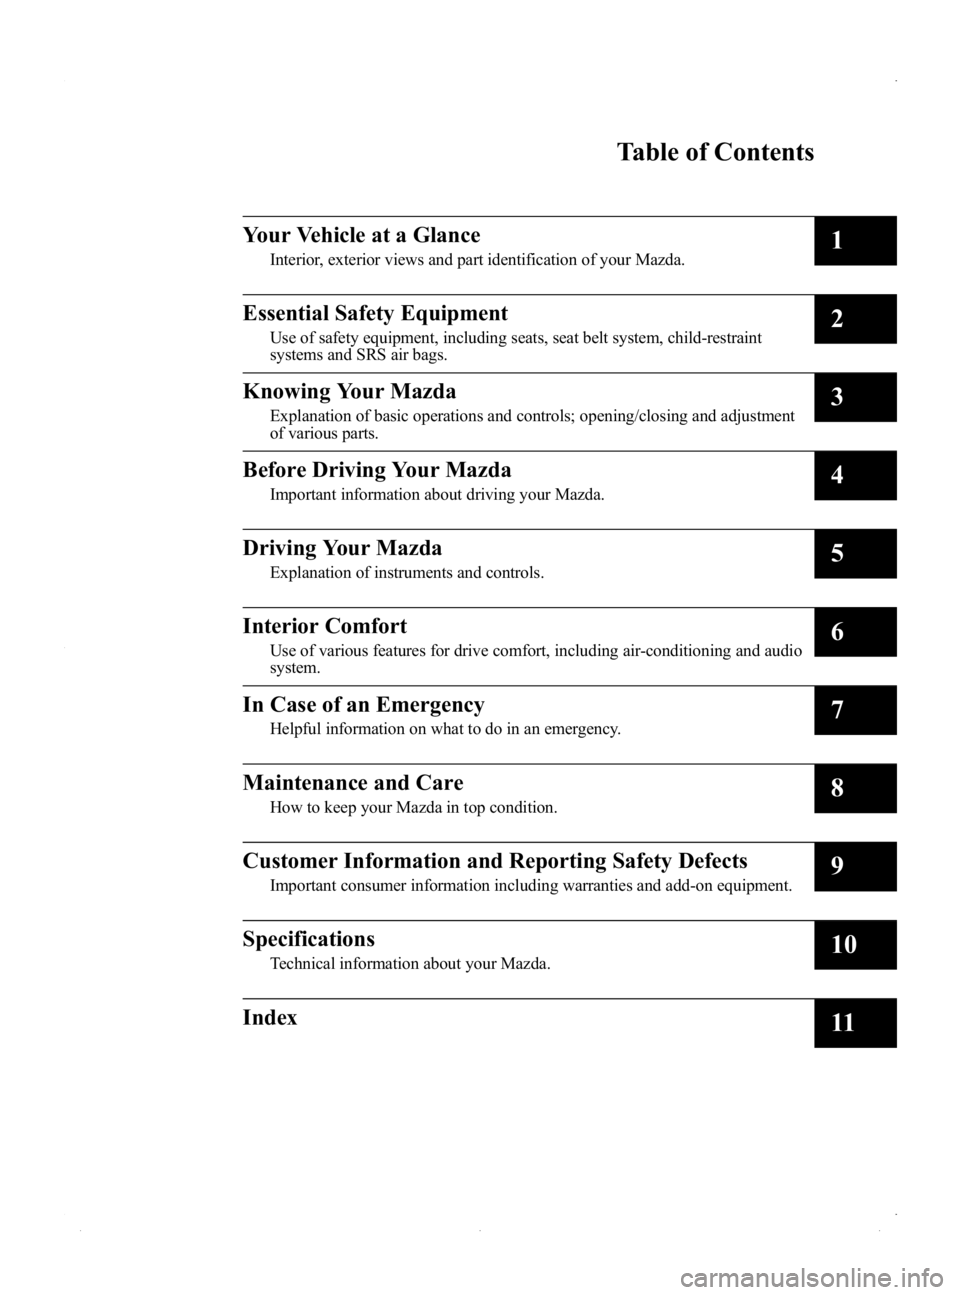 MAZDA MODEL MX-5 MIATA PRHT 2015  Owners Manual Black plate (5,1)
MX-5_8EN7-EA-14E_Edition3 Page5
Friday, September 5 2014 3:19 PM
Form No.8EN7-EA-14E
Table of Contents
Your Vehicle at a Glance
Interior, exterior views and part identification of yo